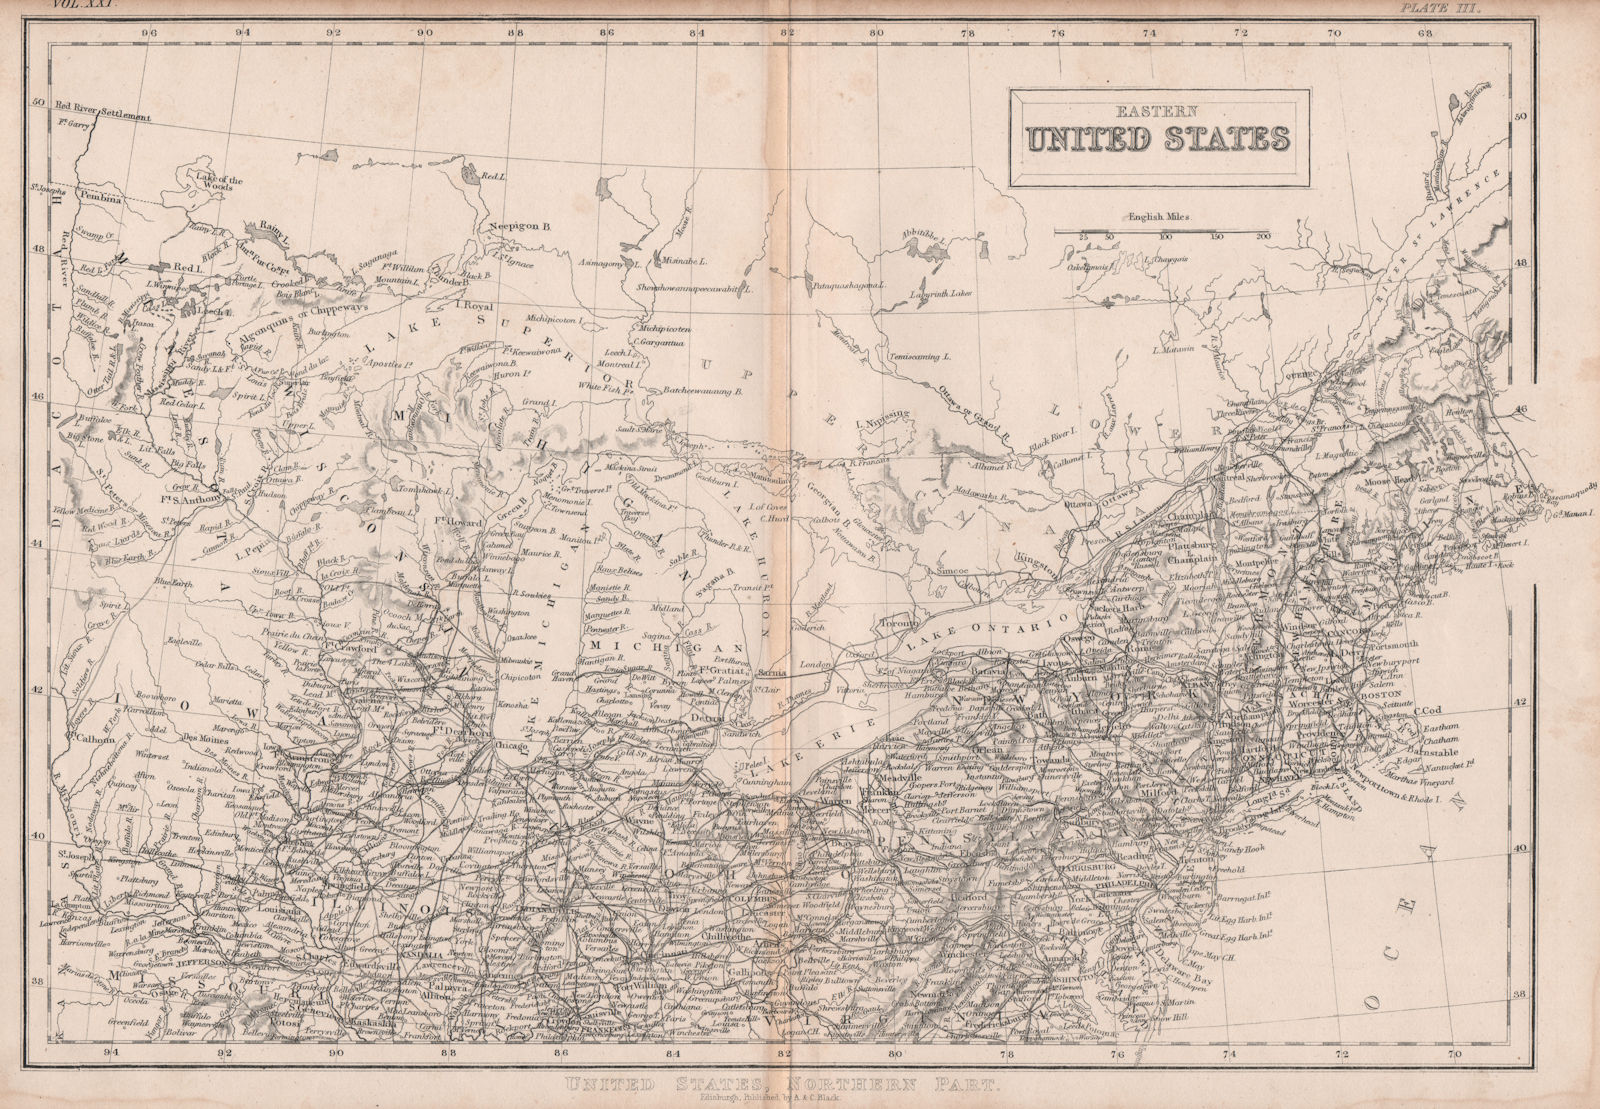 Associate Product North eastern United States. USA. BRITANNICA 1860 old antique map plan chart